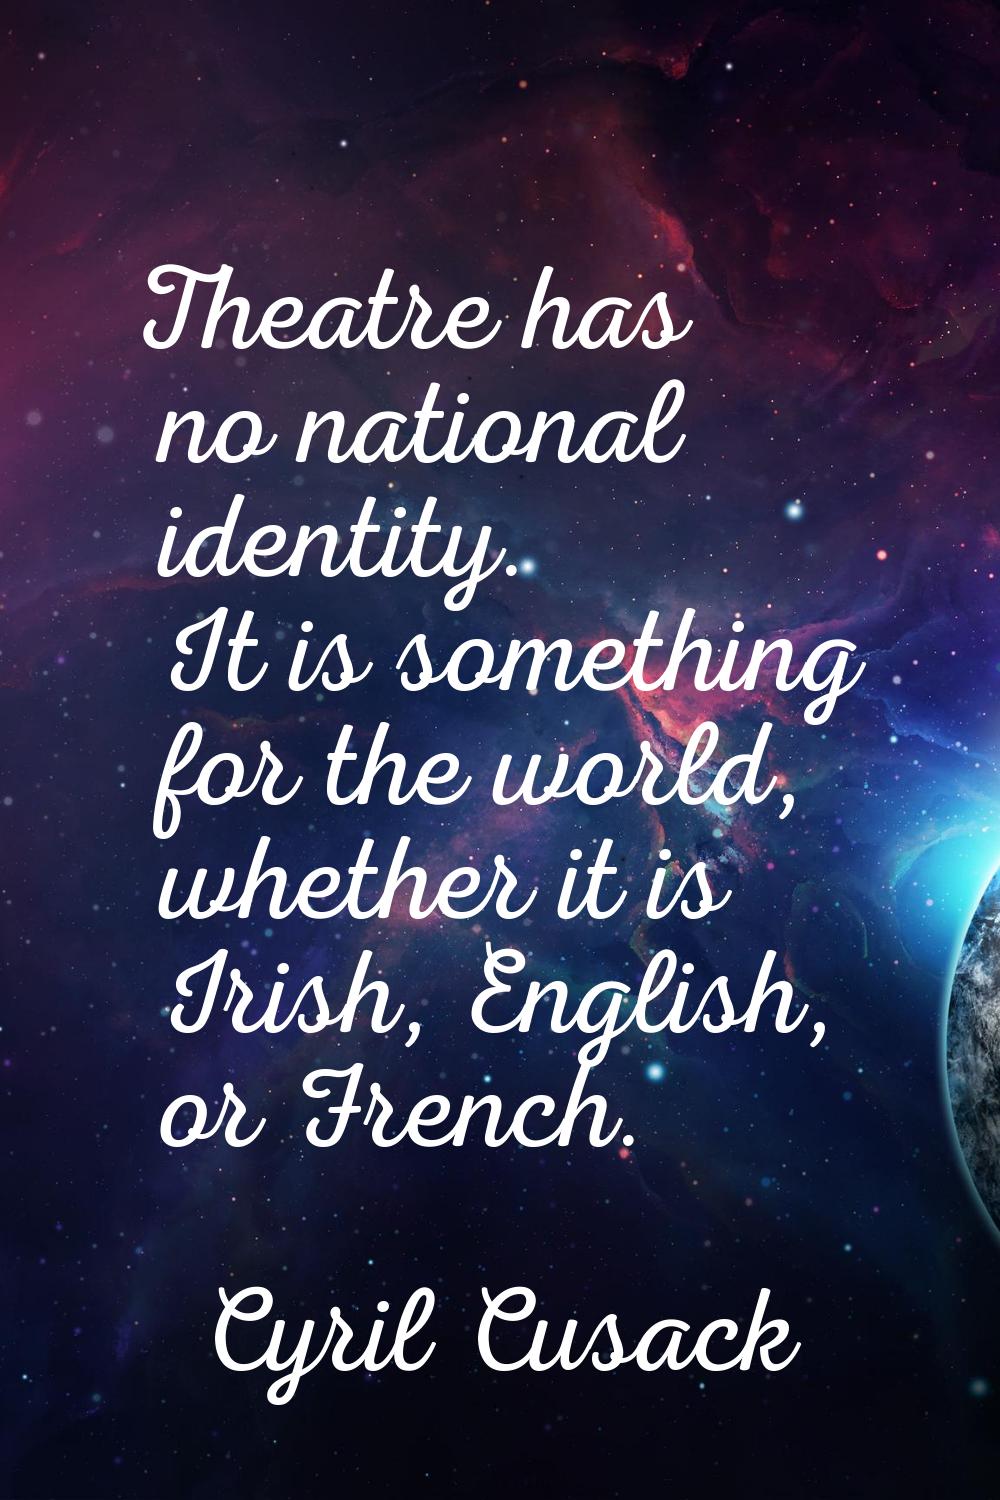 Theatre has no national identity. It is something for the world, whether it is Irish, English, or F